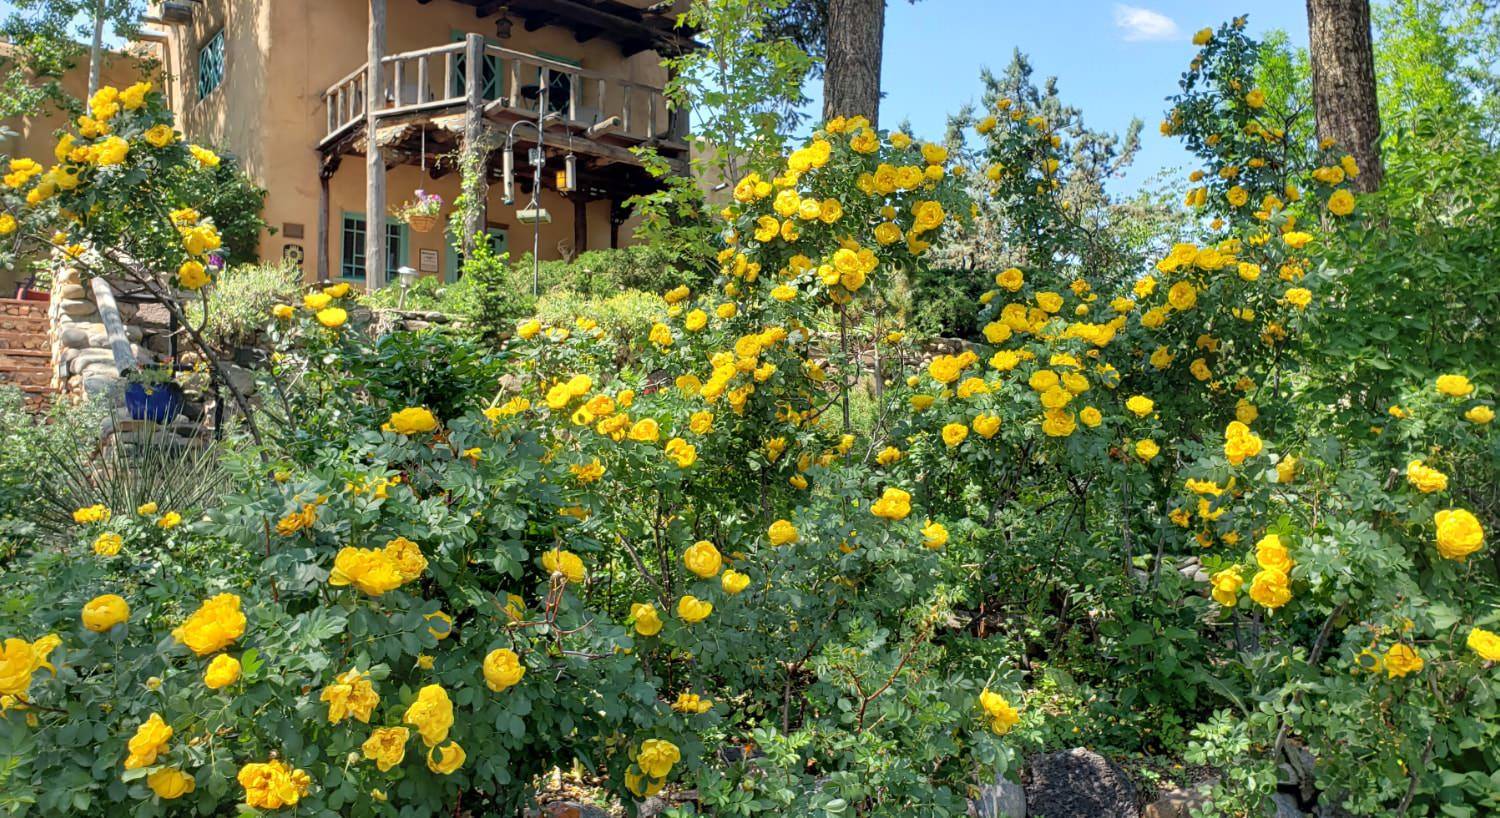 Close up view of yellow rose bushes with the property in the background